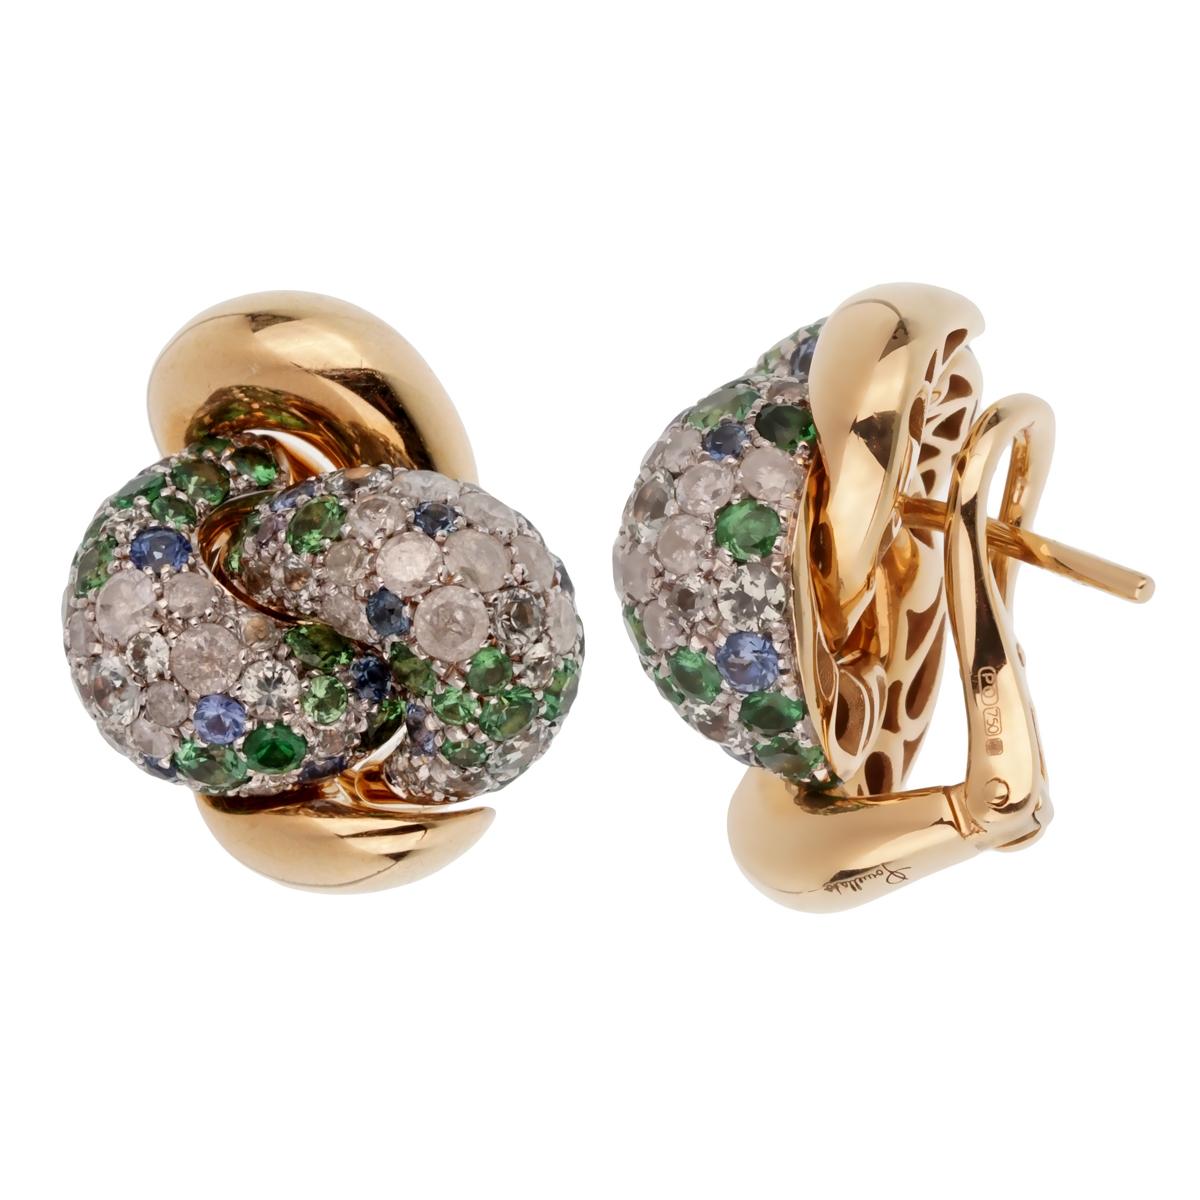 A fabulous set of brand new Pomellato rose gold diamond, and multicolor sapphire earrings. The diamonds weight 1.46ct surrounded by 1.50ct of sapphires in 18k rose gold.

Pomellato Retail Price: $16,900
Sku:2199